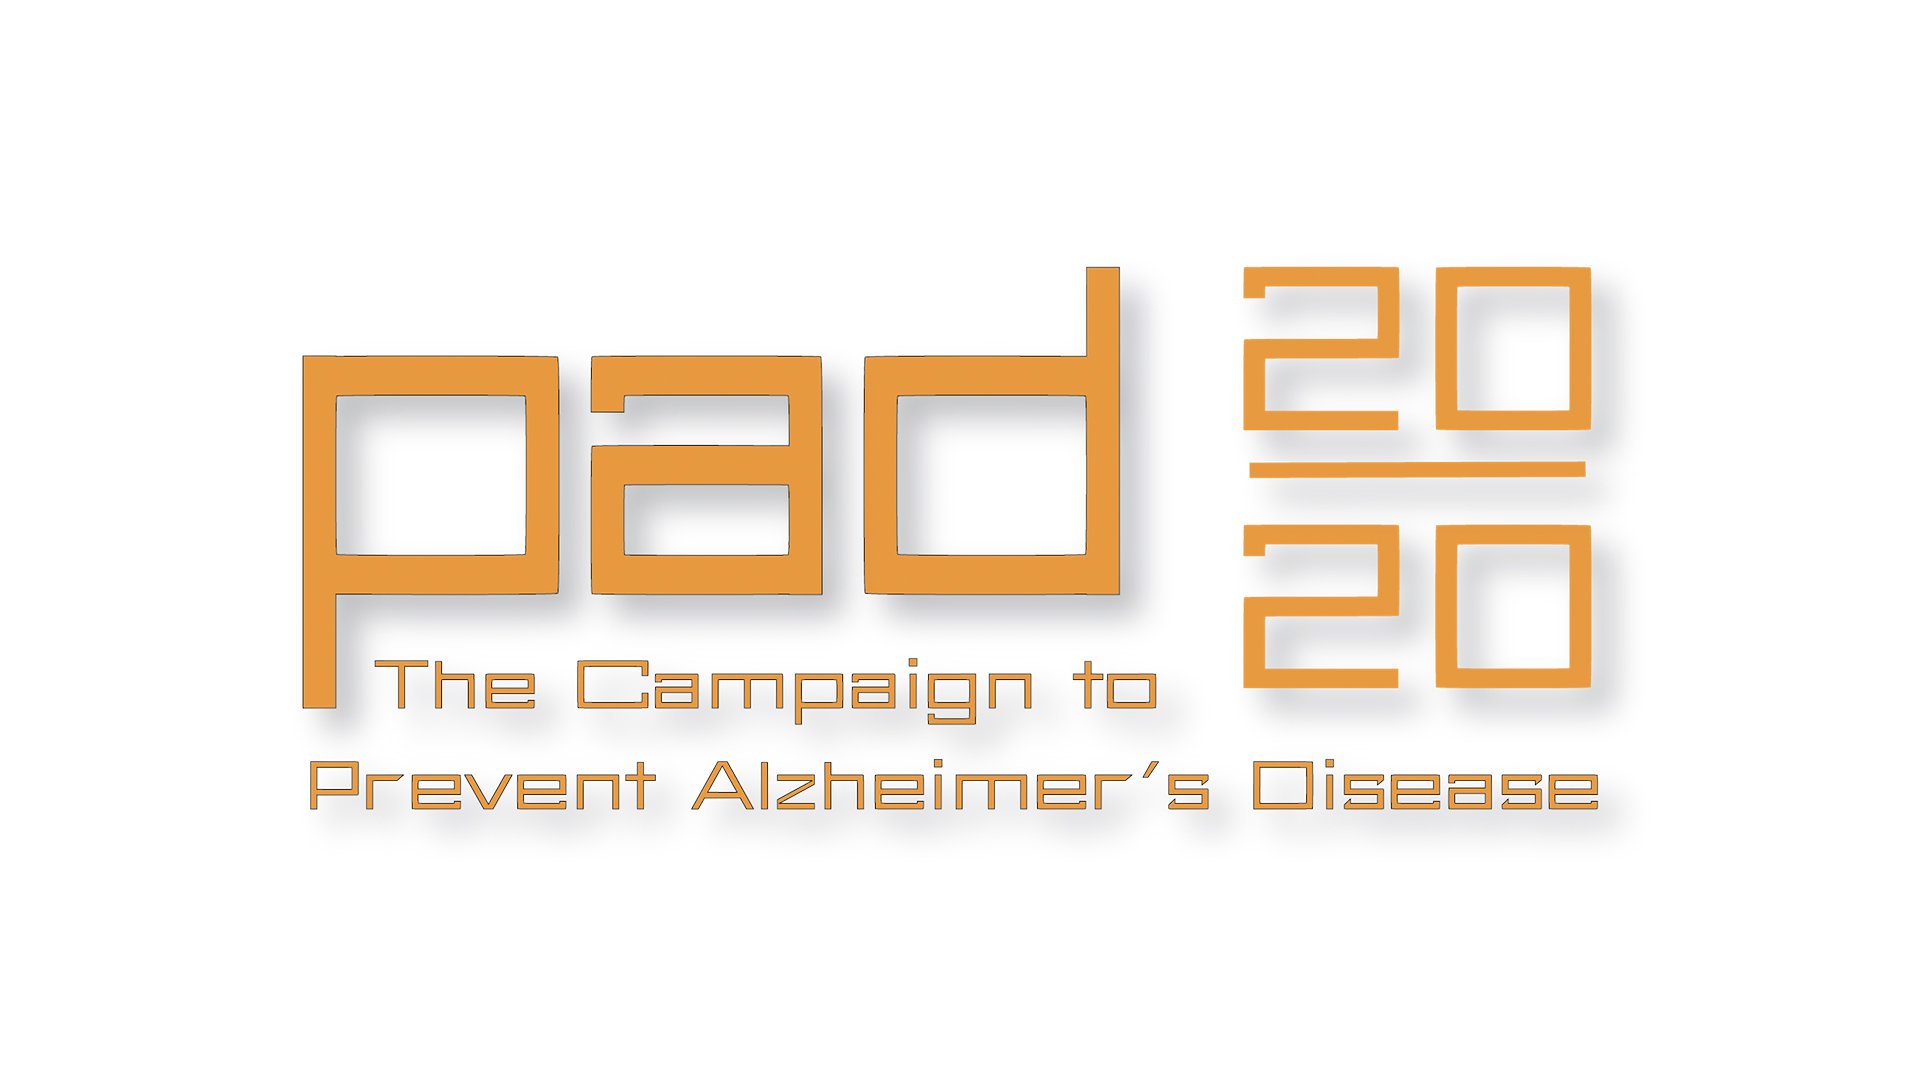 CEOi_0016_The Campaign to Prevent Alzheimer’s Disease.jpg